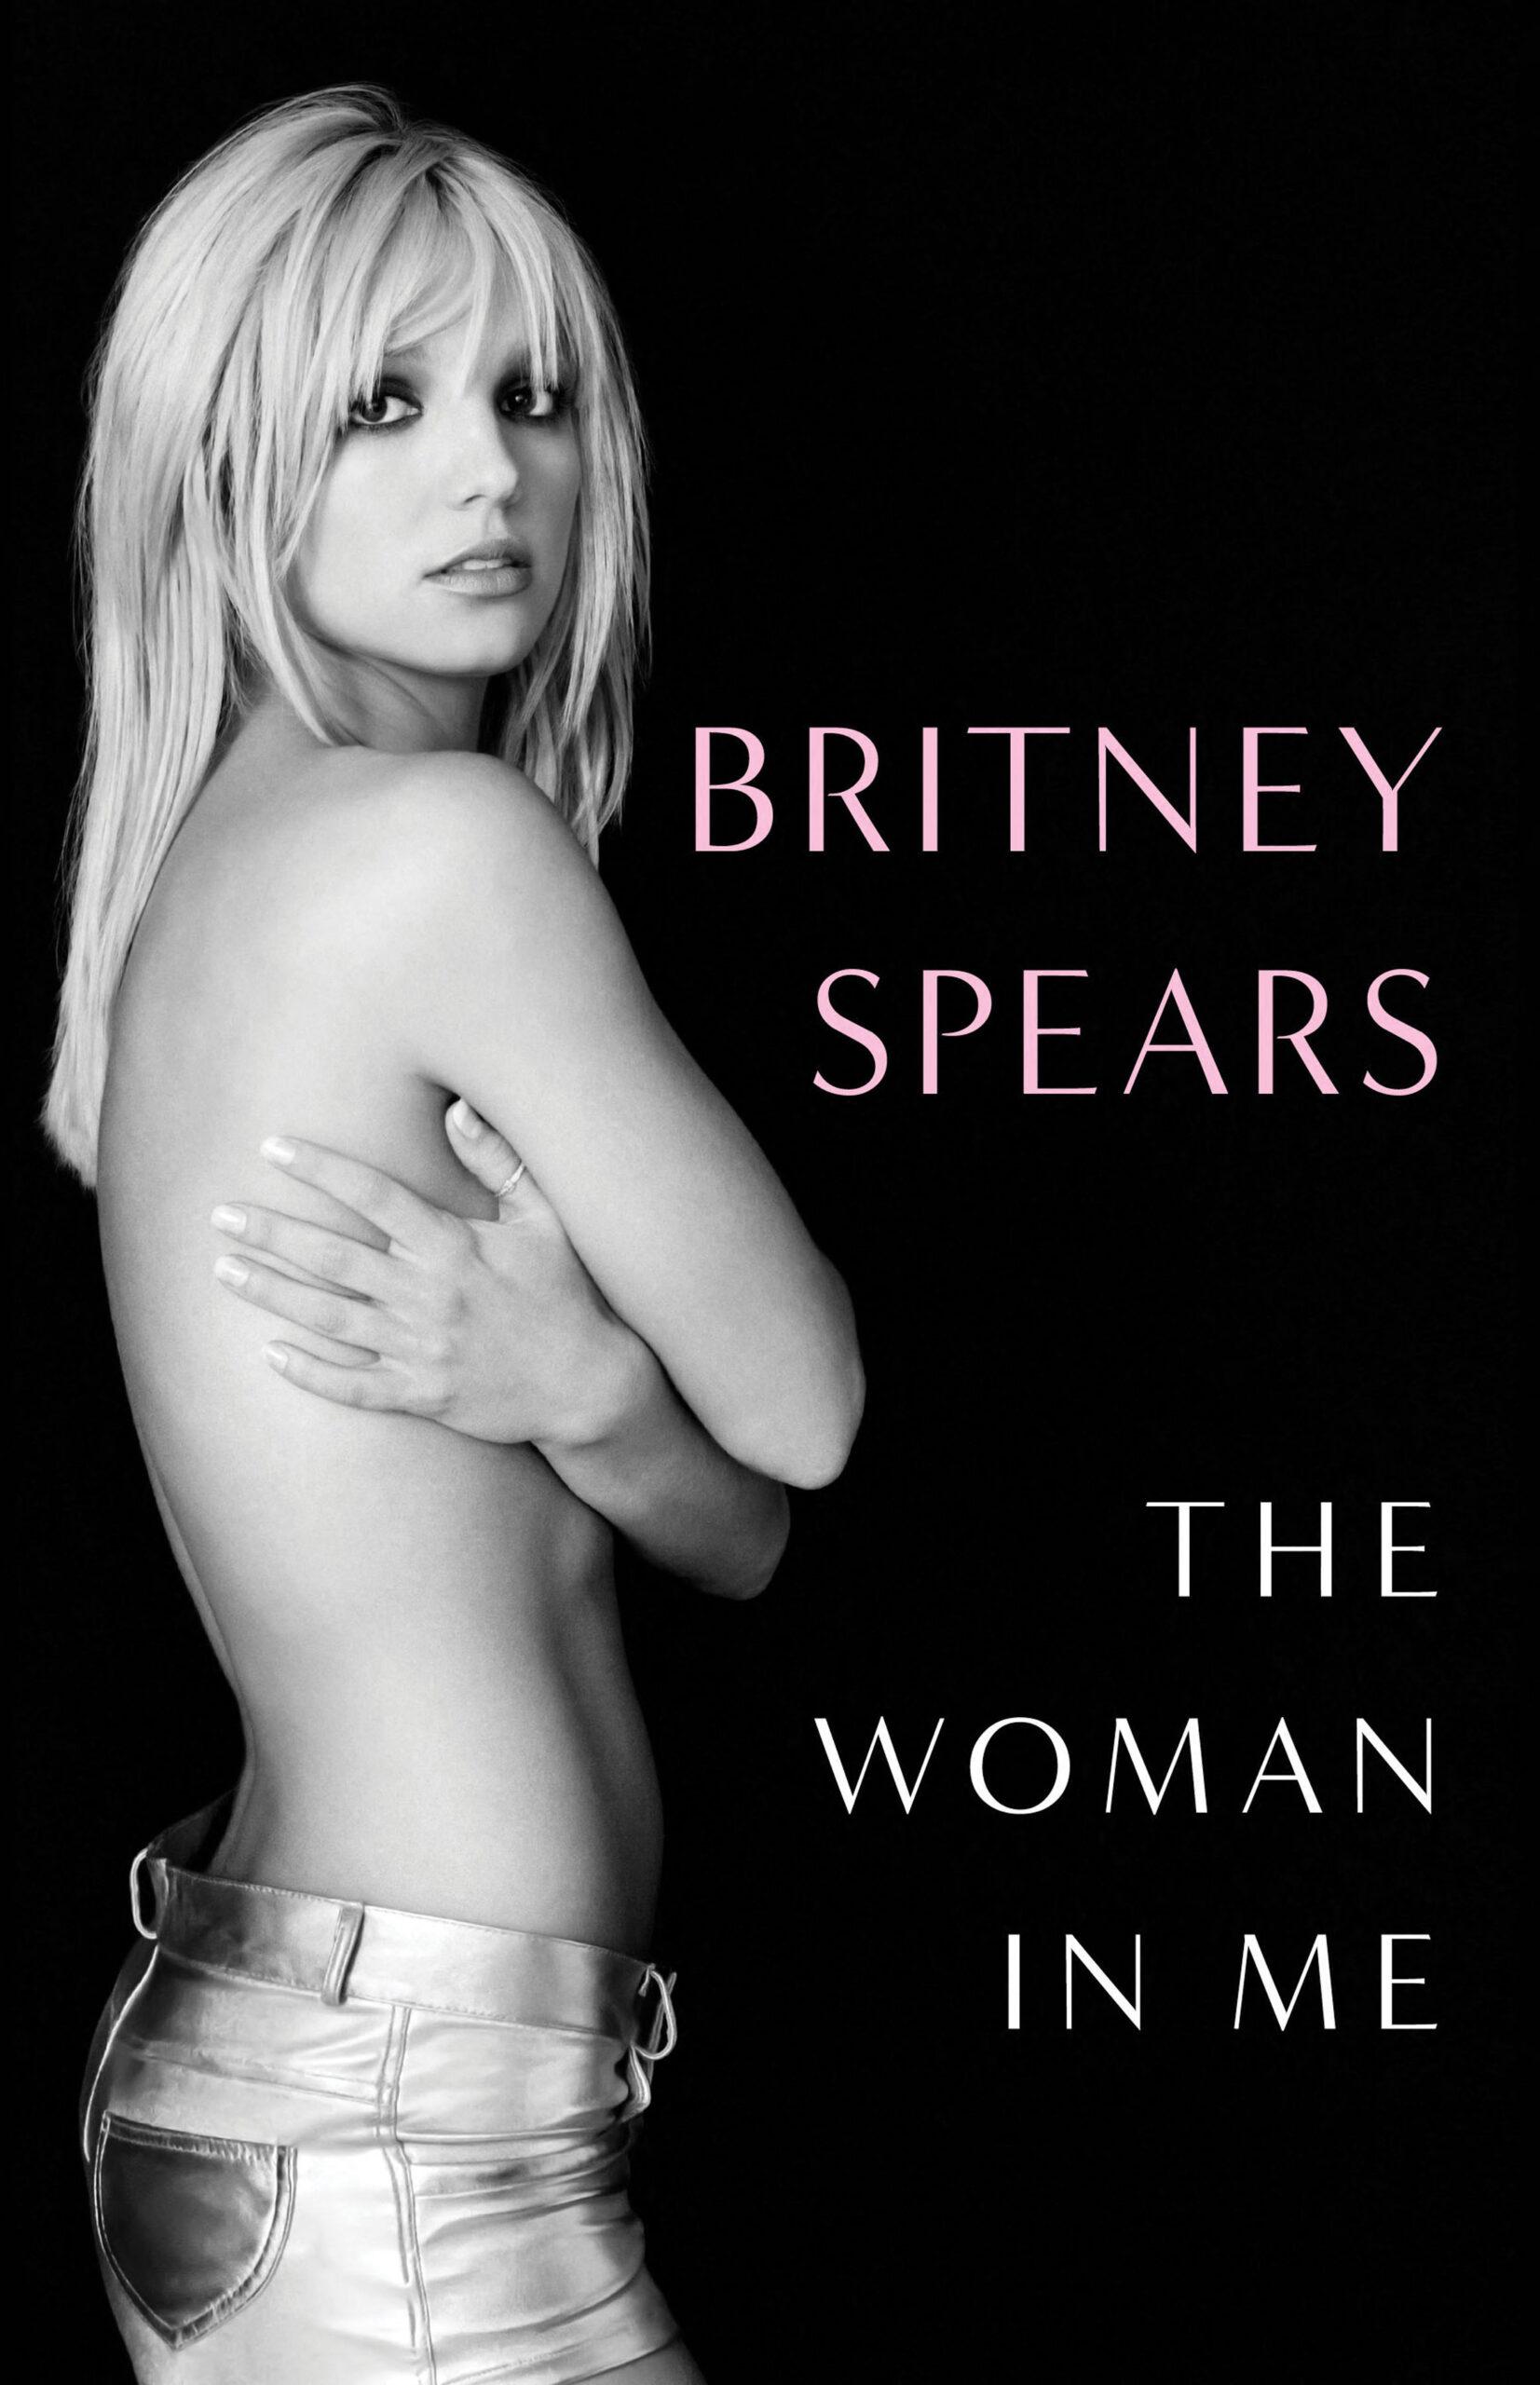 Britney Spears poses topless on the cover of her newly announced memoir The Woman in Me